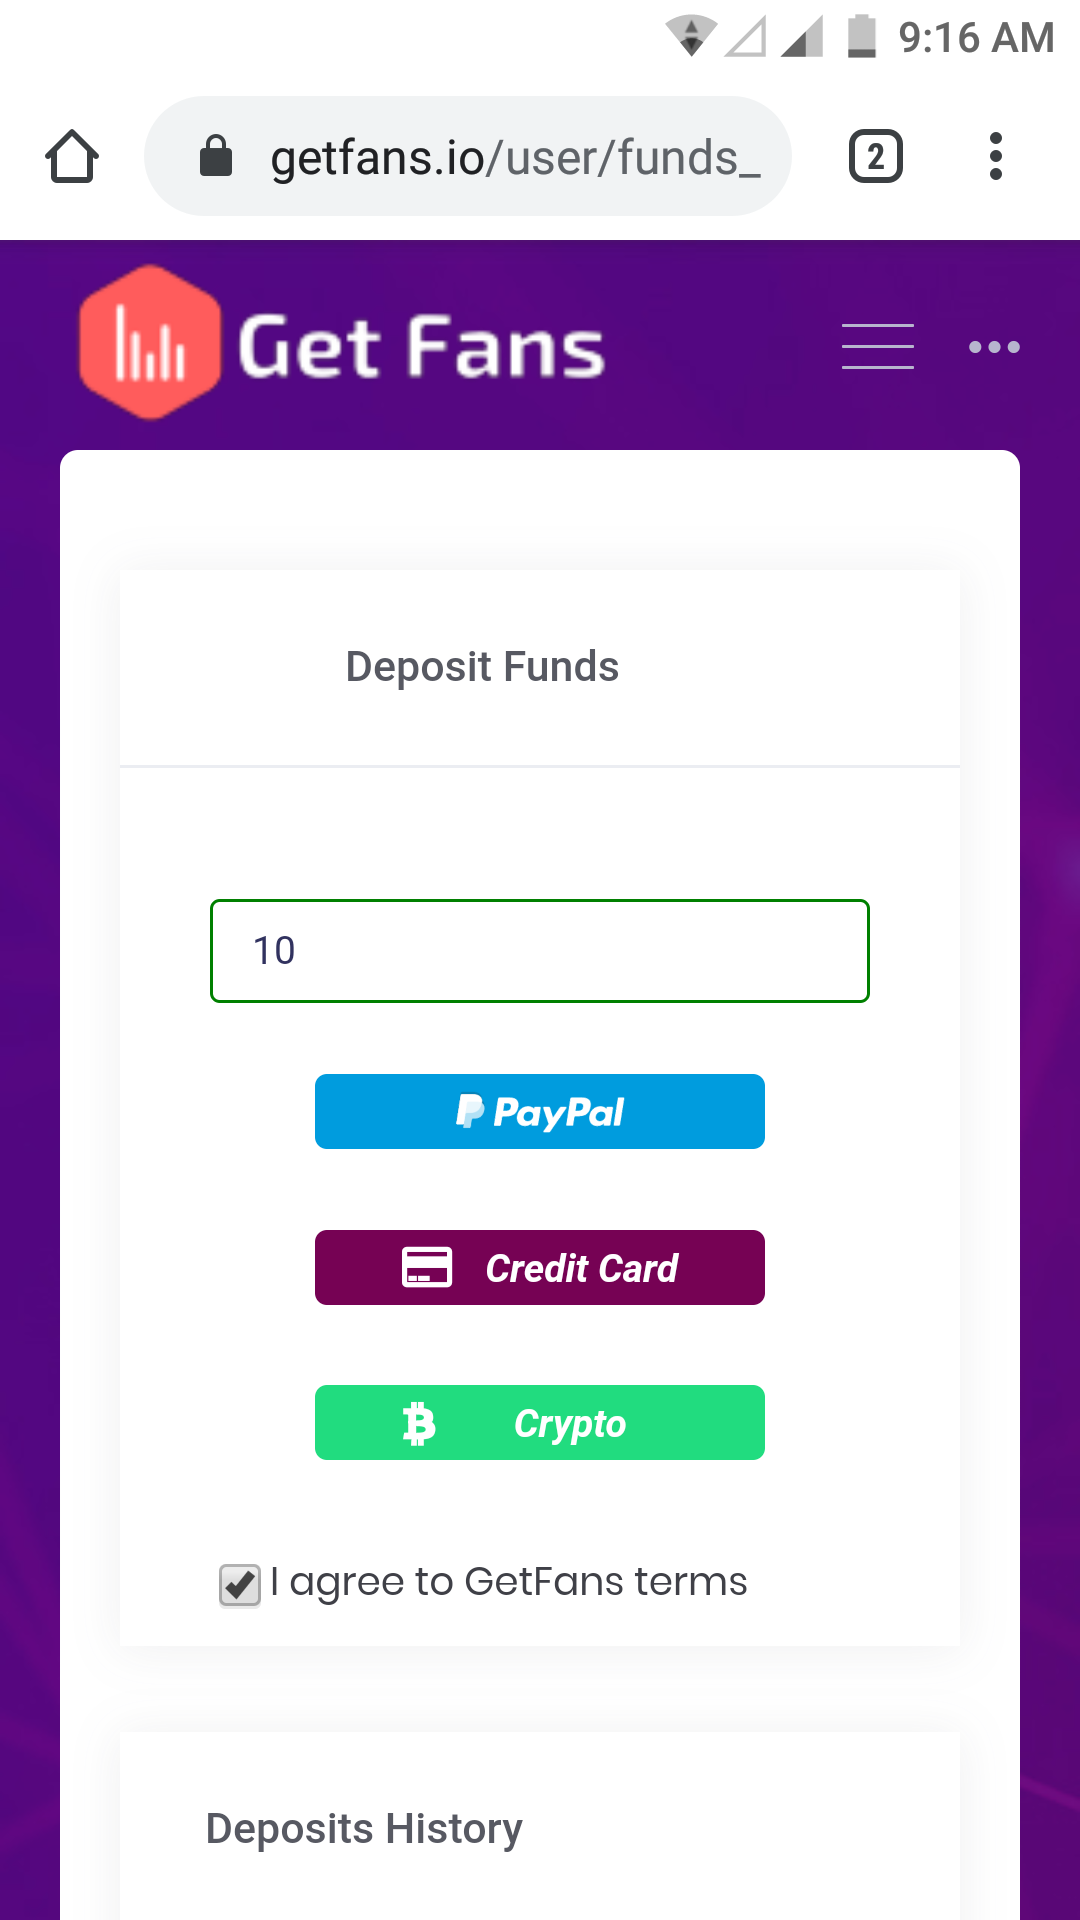 Adding Funds To My GetFans.io Account